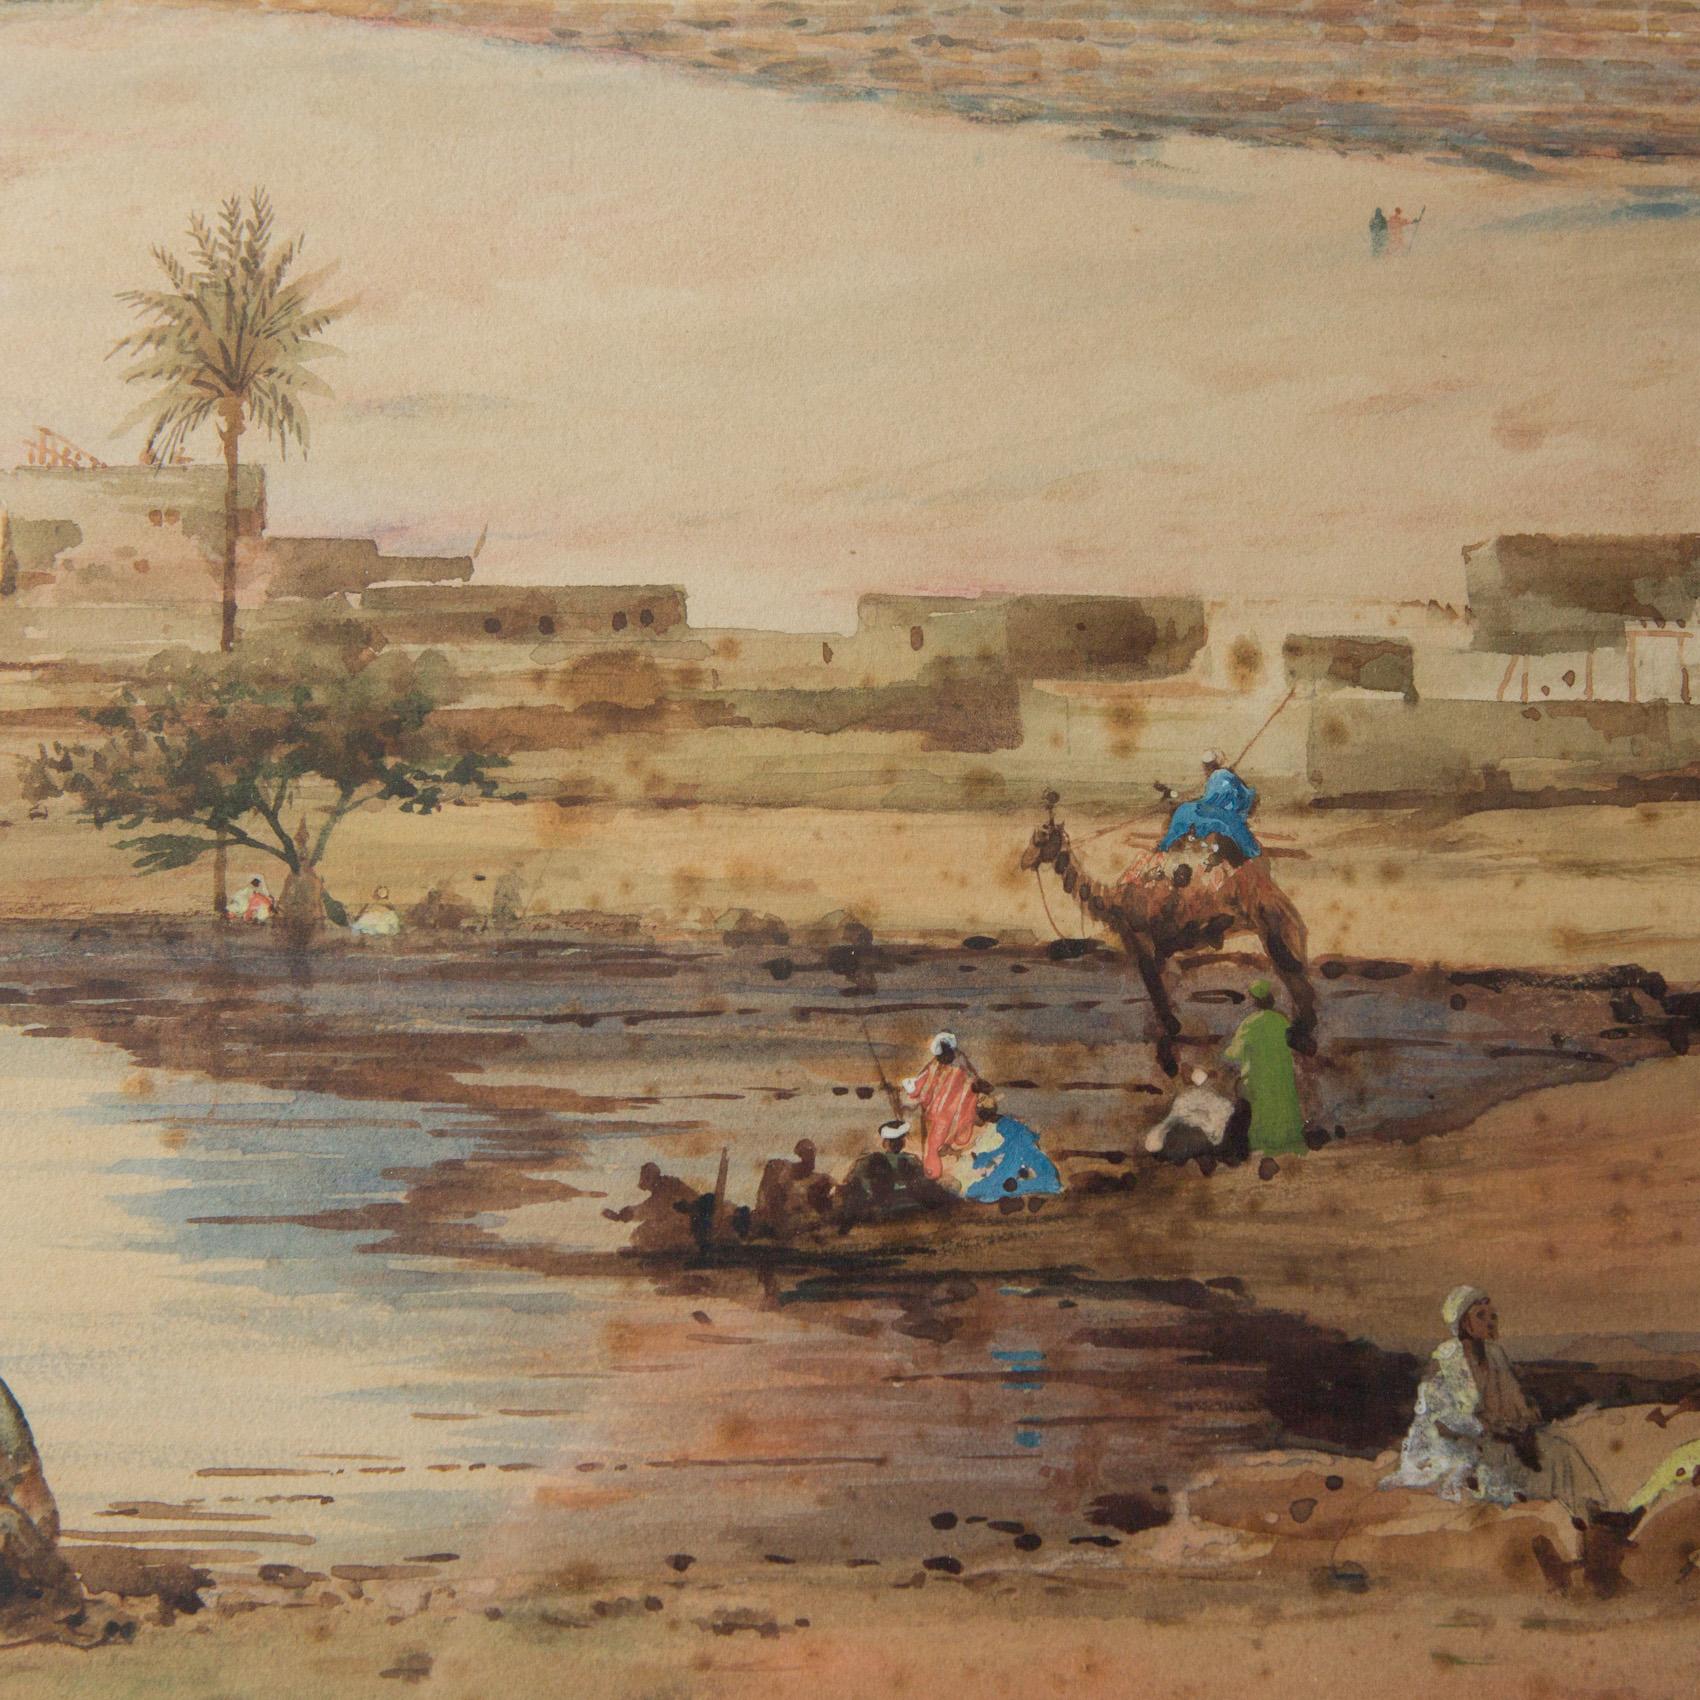 English Large Watercolour of Cairo by Robert Murdoch Wright